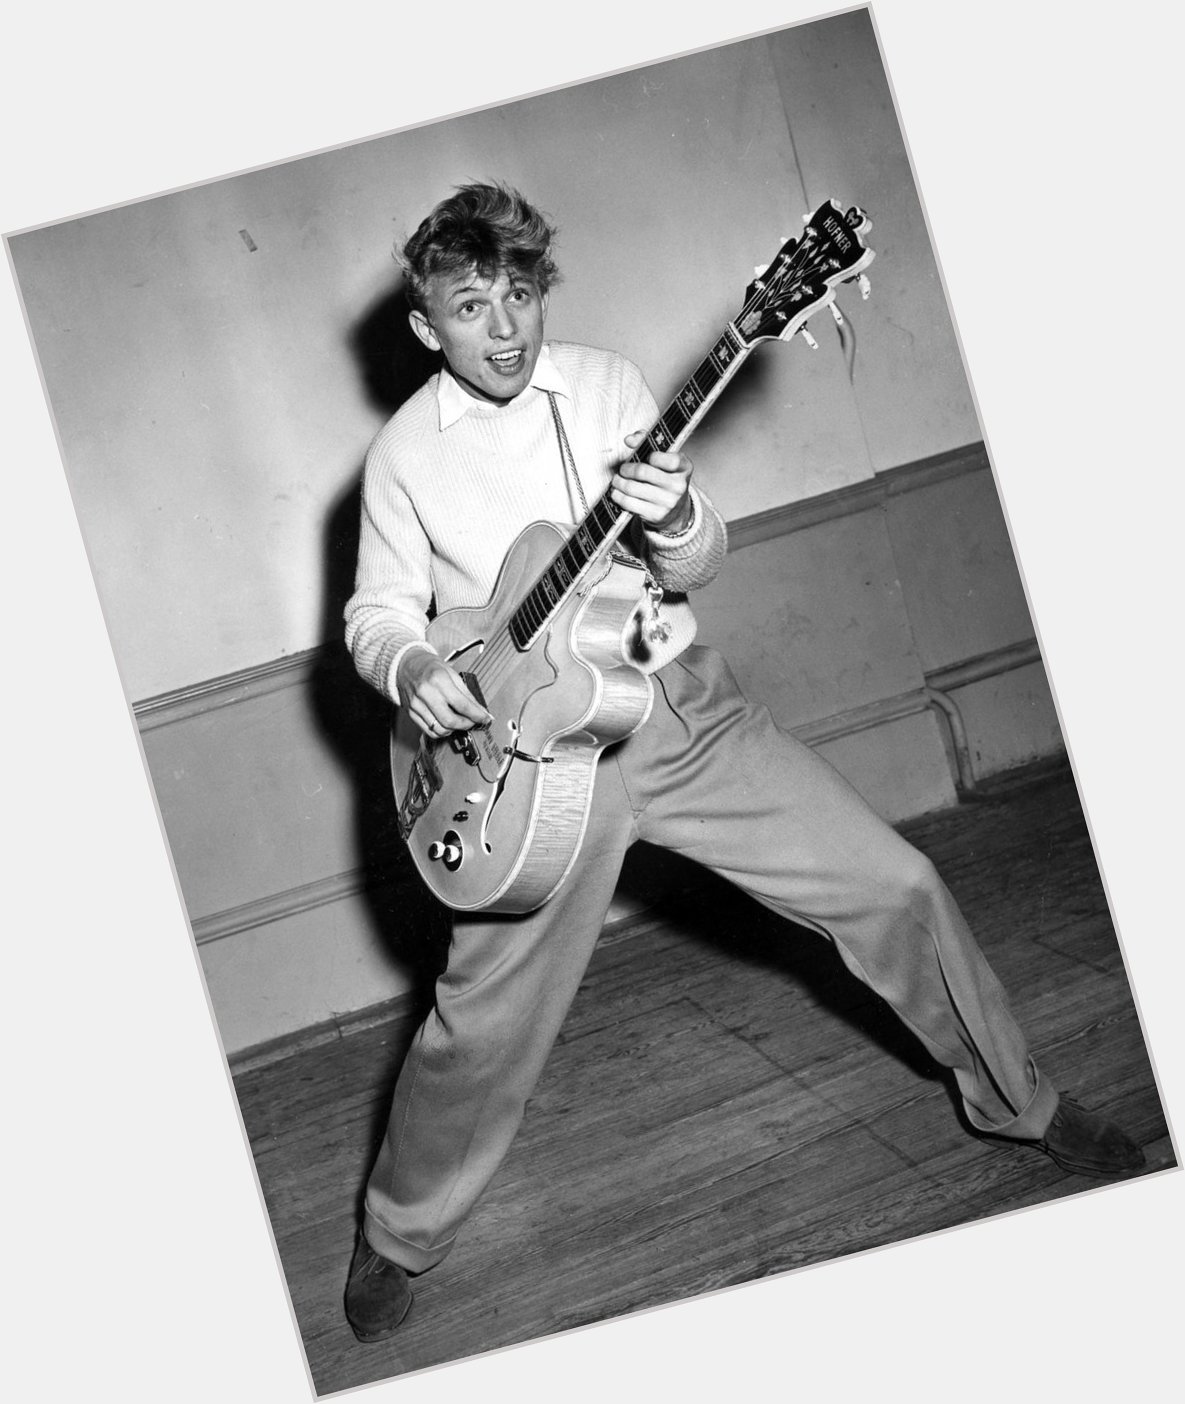 Please join us here at in wishing the one and only Tommy Steele a very Happy 84th Birthday today  